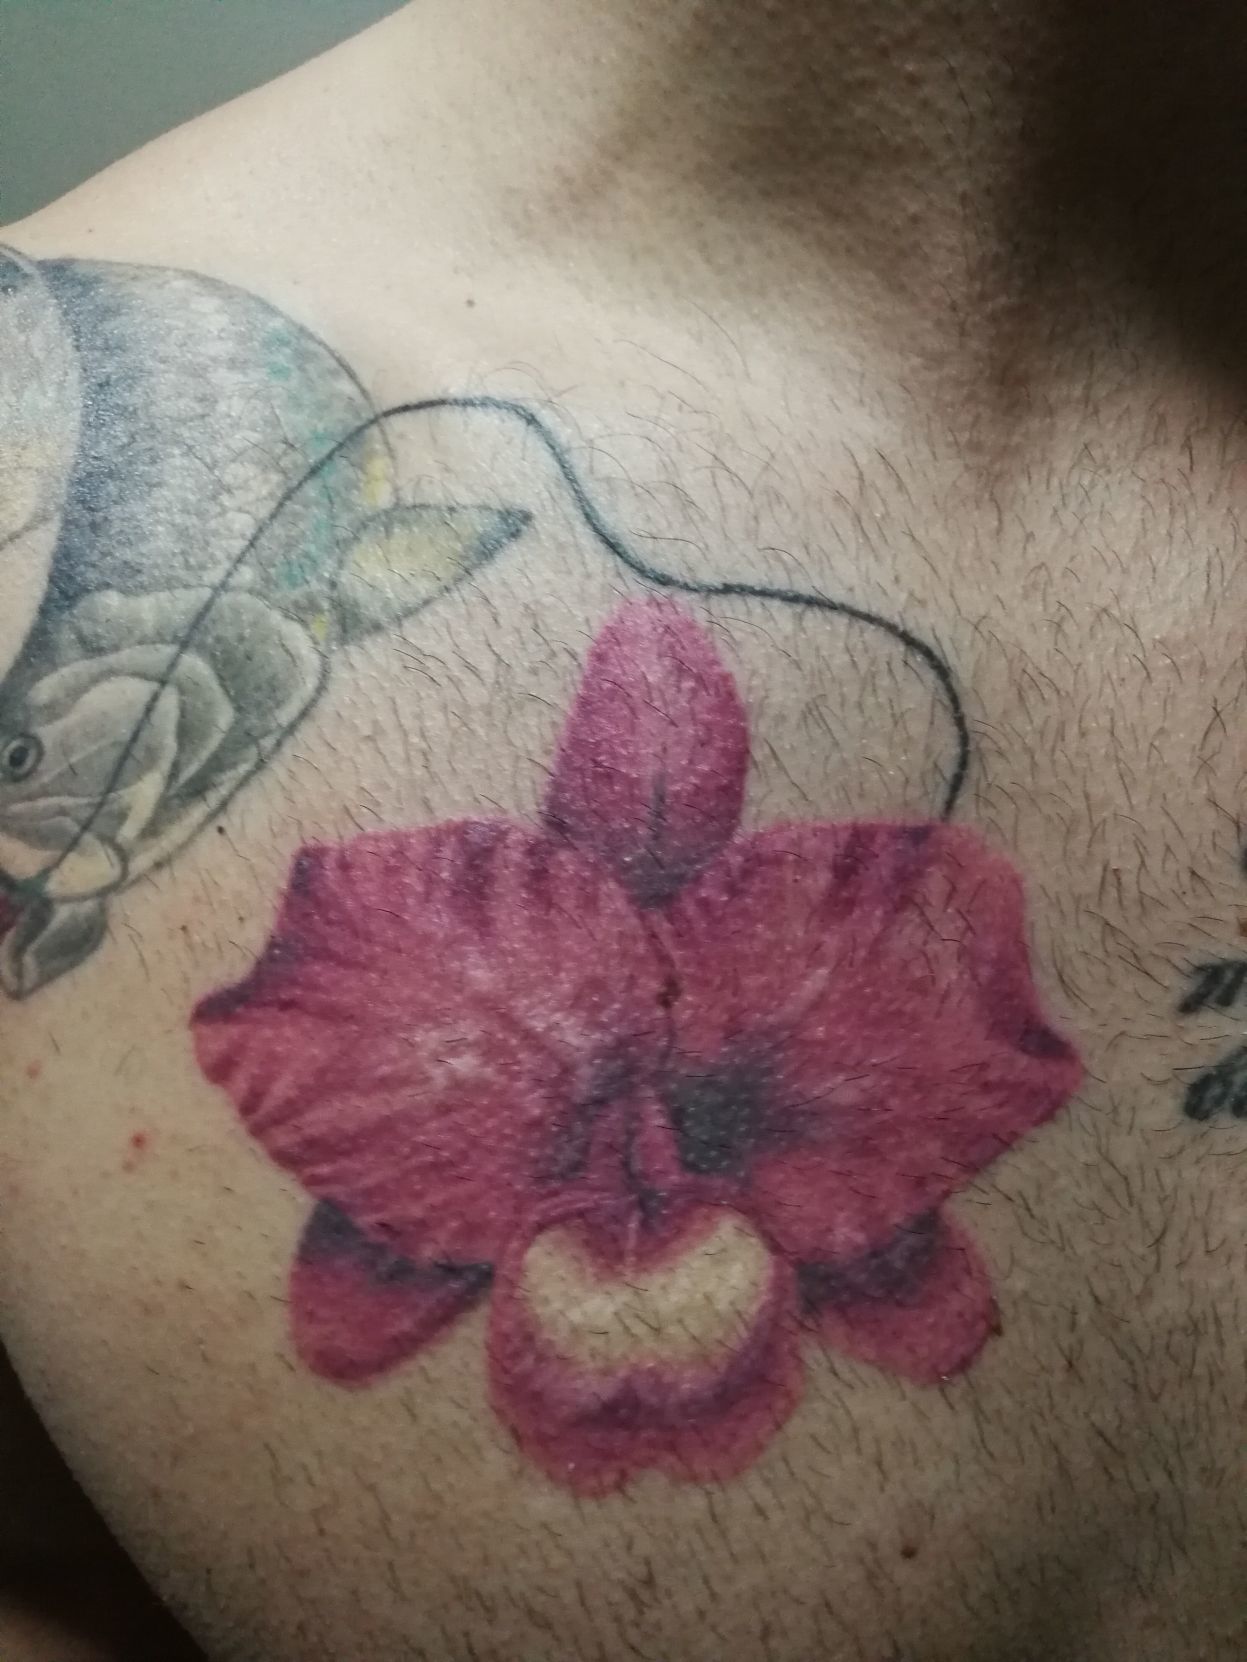 The Man with the Orchid Tattoo  inocentesabroad